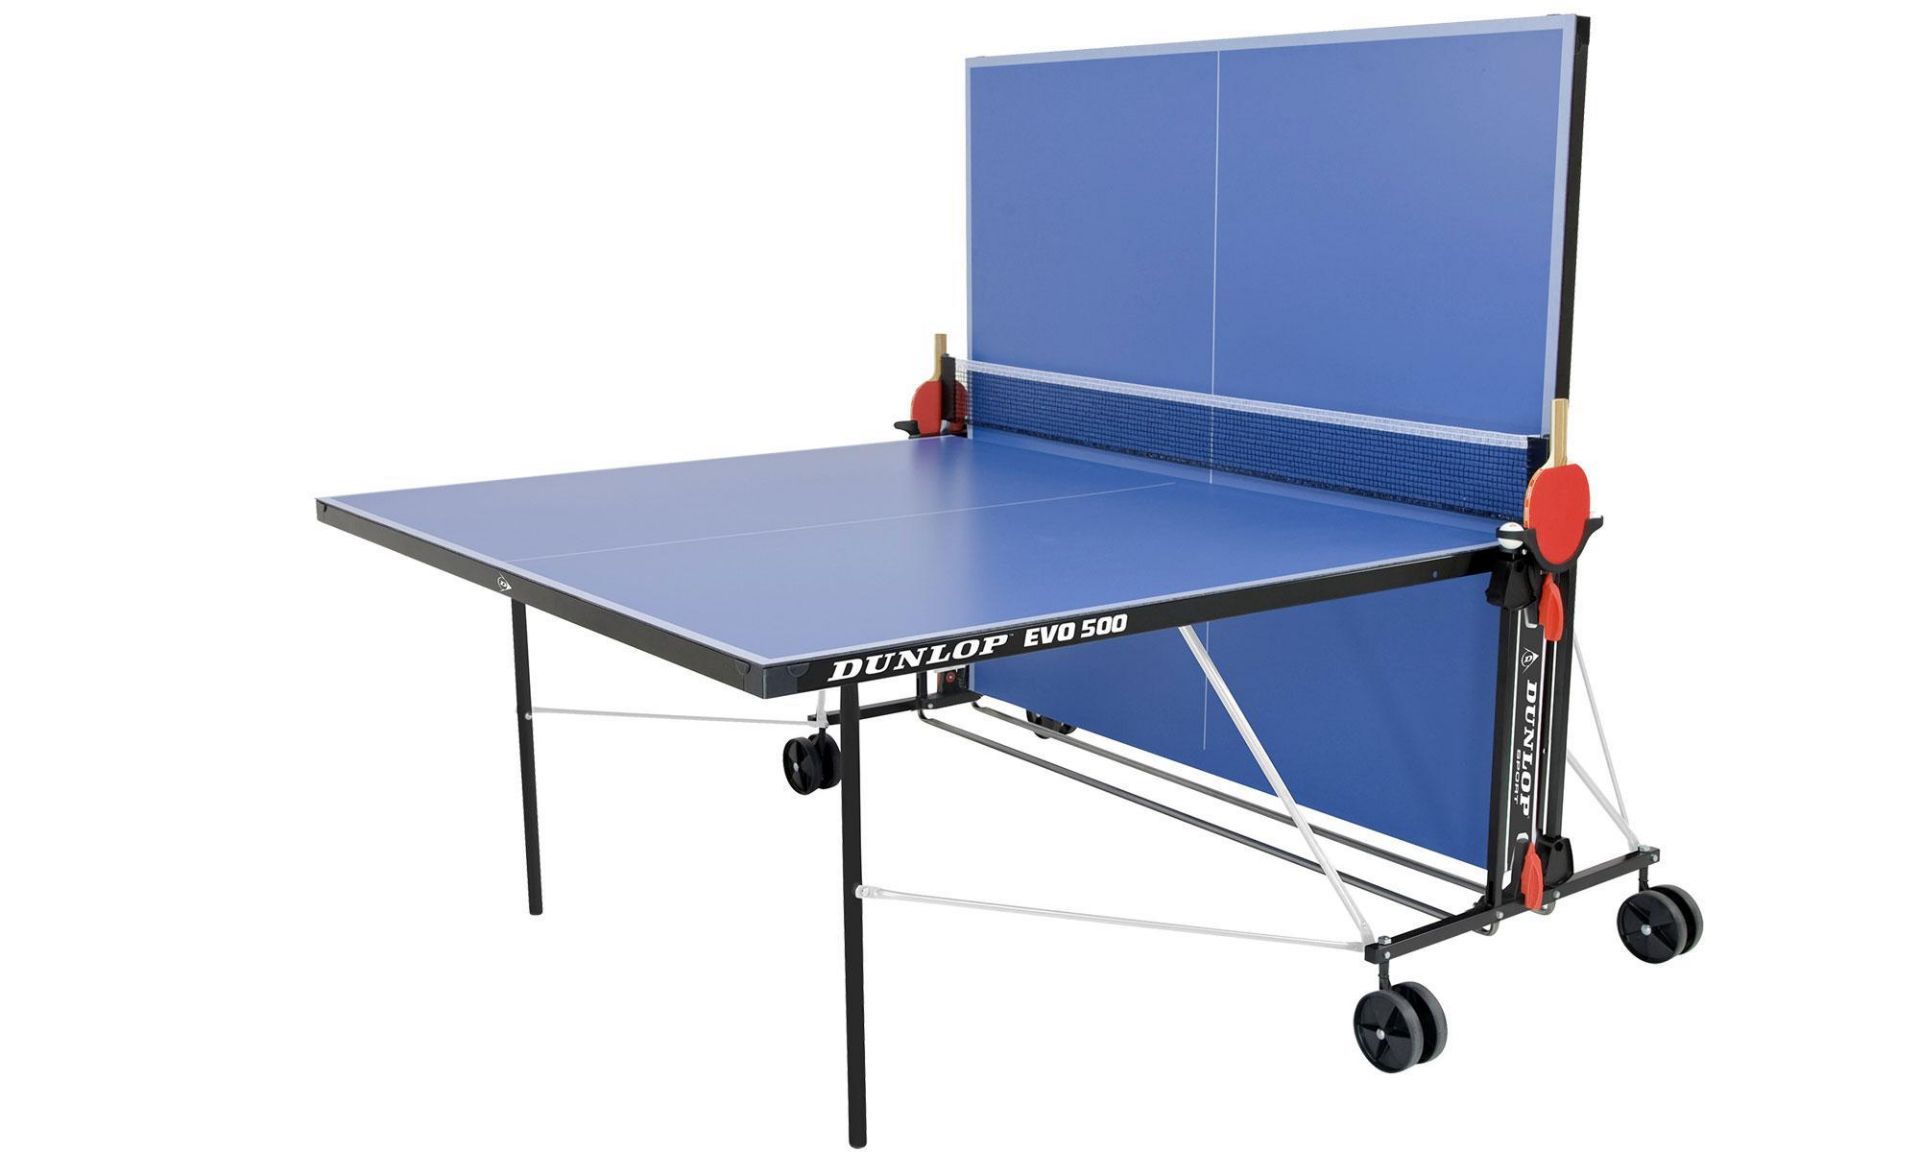 1 x Sweatband Dunlop Evo 500 Outdoor TT Table Blue RRP £399.00 This lot is a completely UNCHECKED.